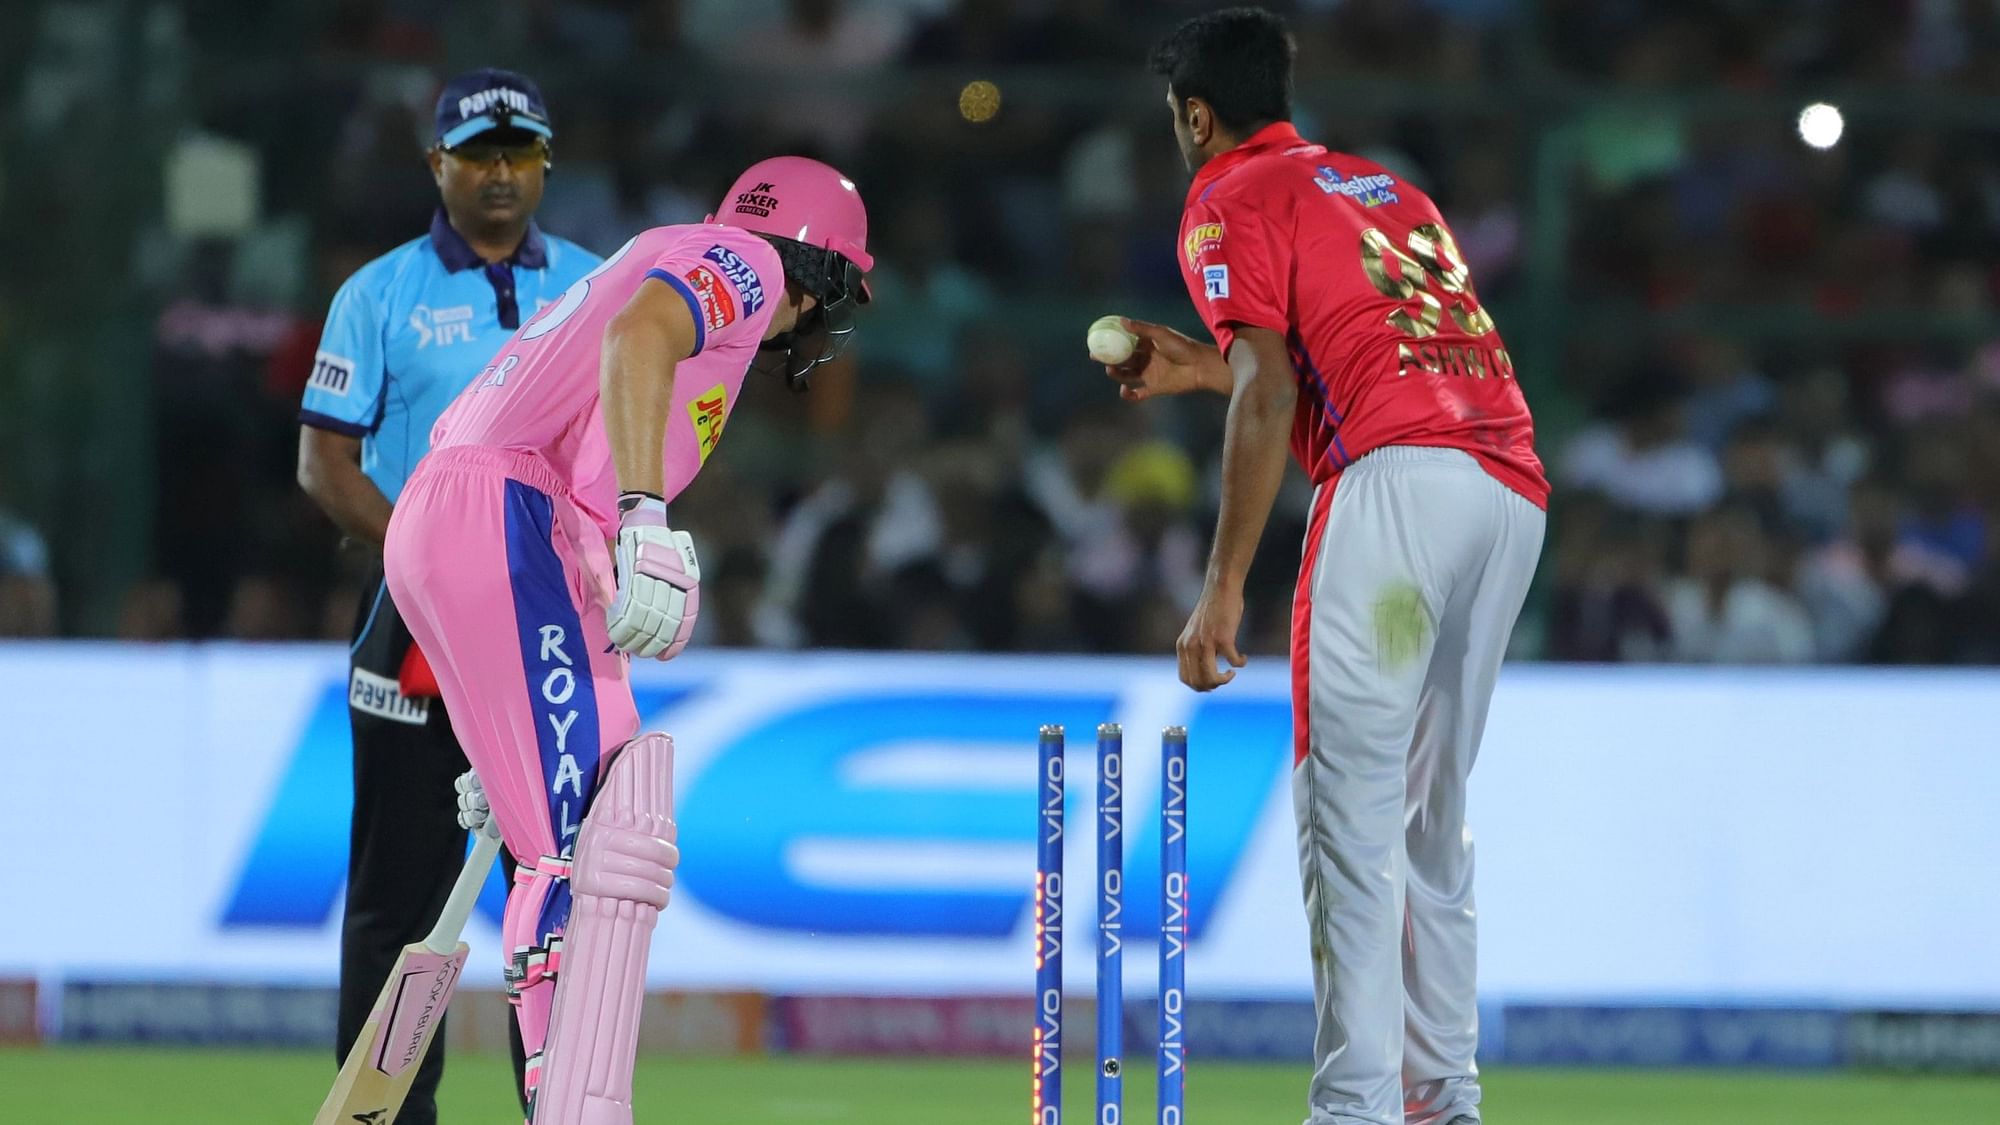 Ashwin ‘Mankaded’ Buttler on 69 and that started the spiral of the Royals’ innings.